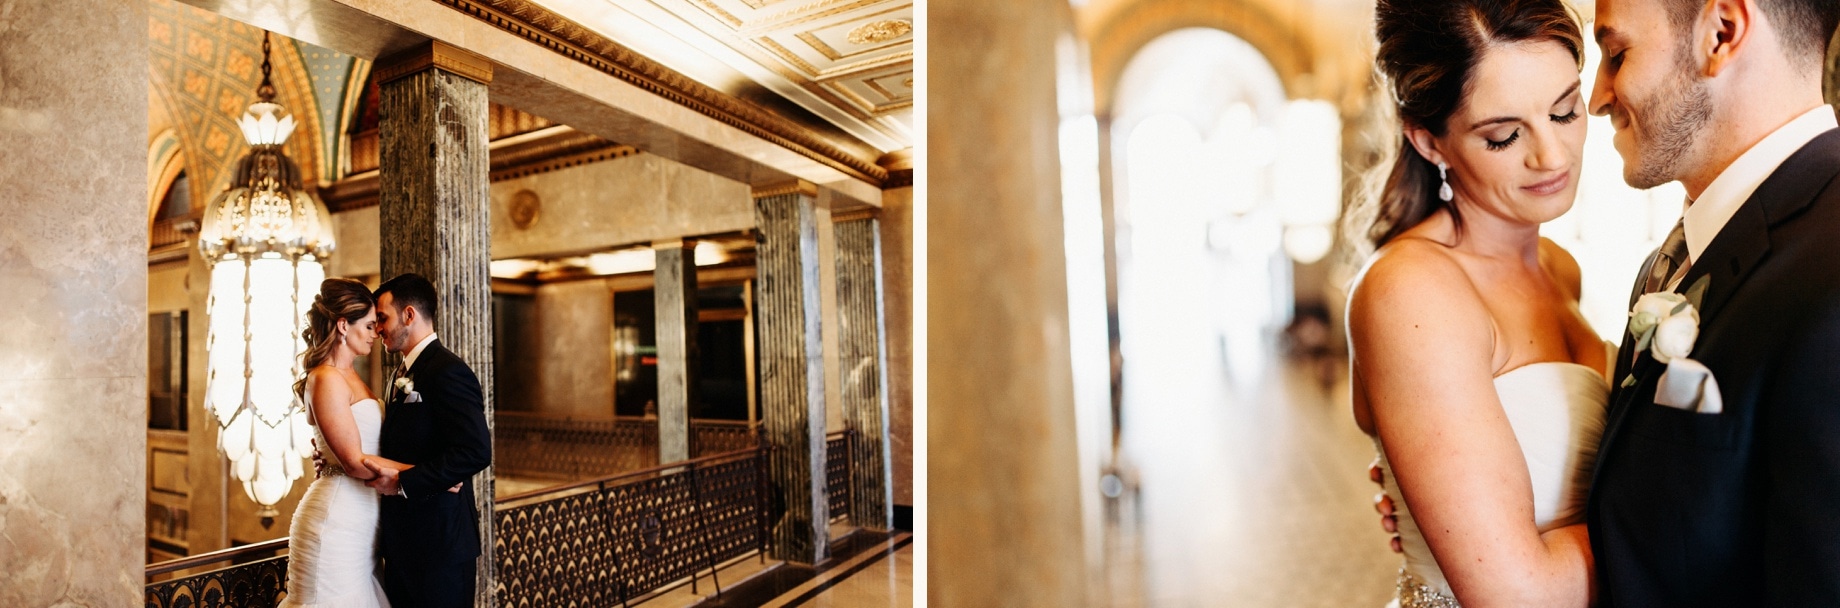 bride and groom portraits in the fisher building by detroit wedding photographer heather jowett